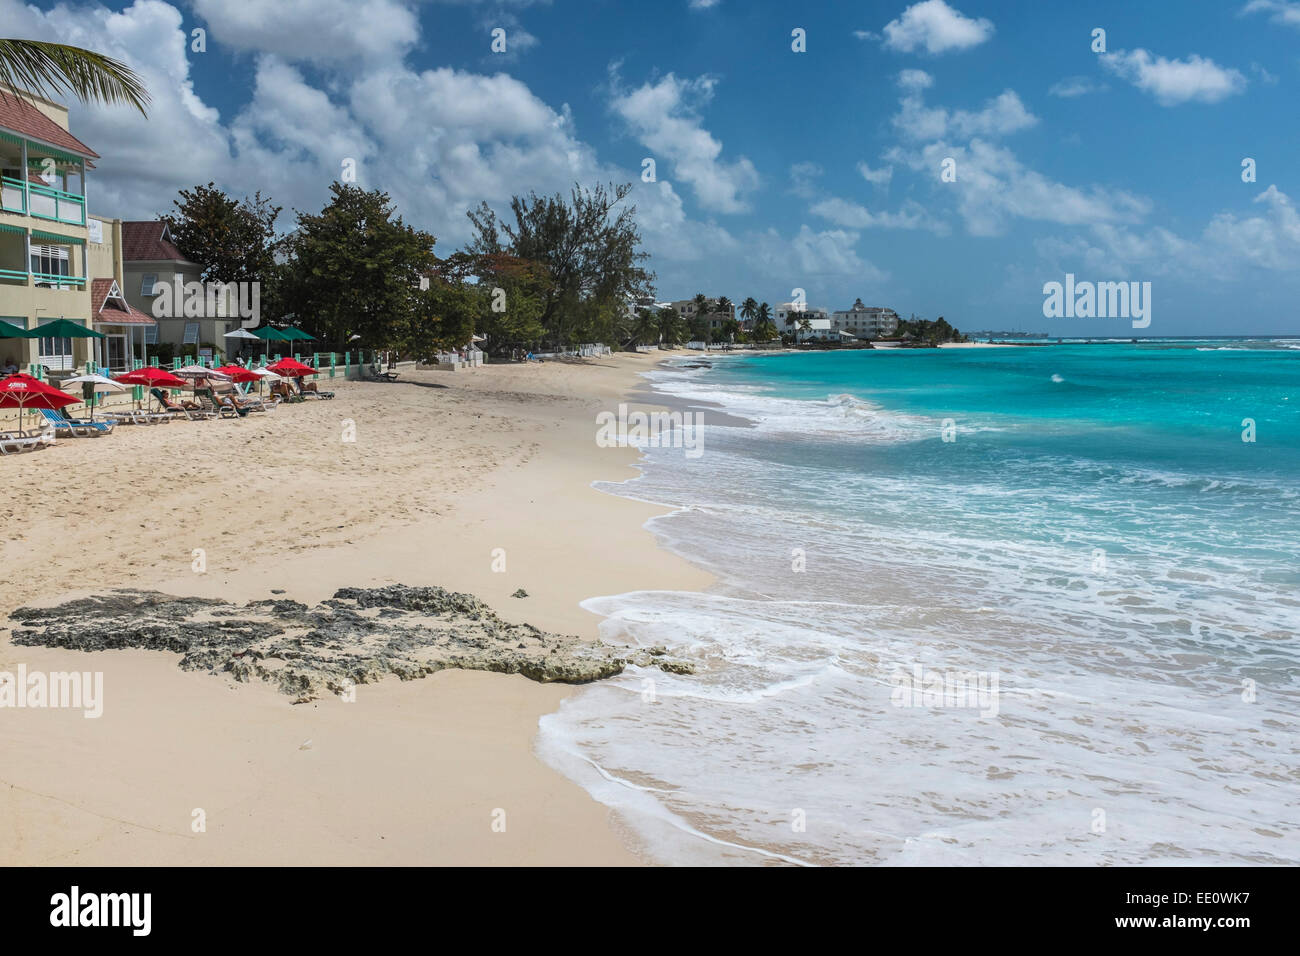 Worthing Beach on the south coast of the Caribbean island of Barbados in the West Indies. - EDITORIAL USE ONLY Stock Photo